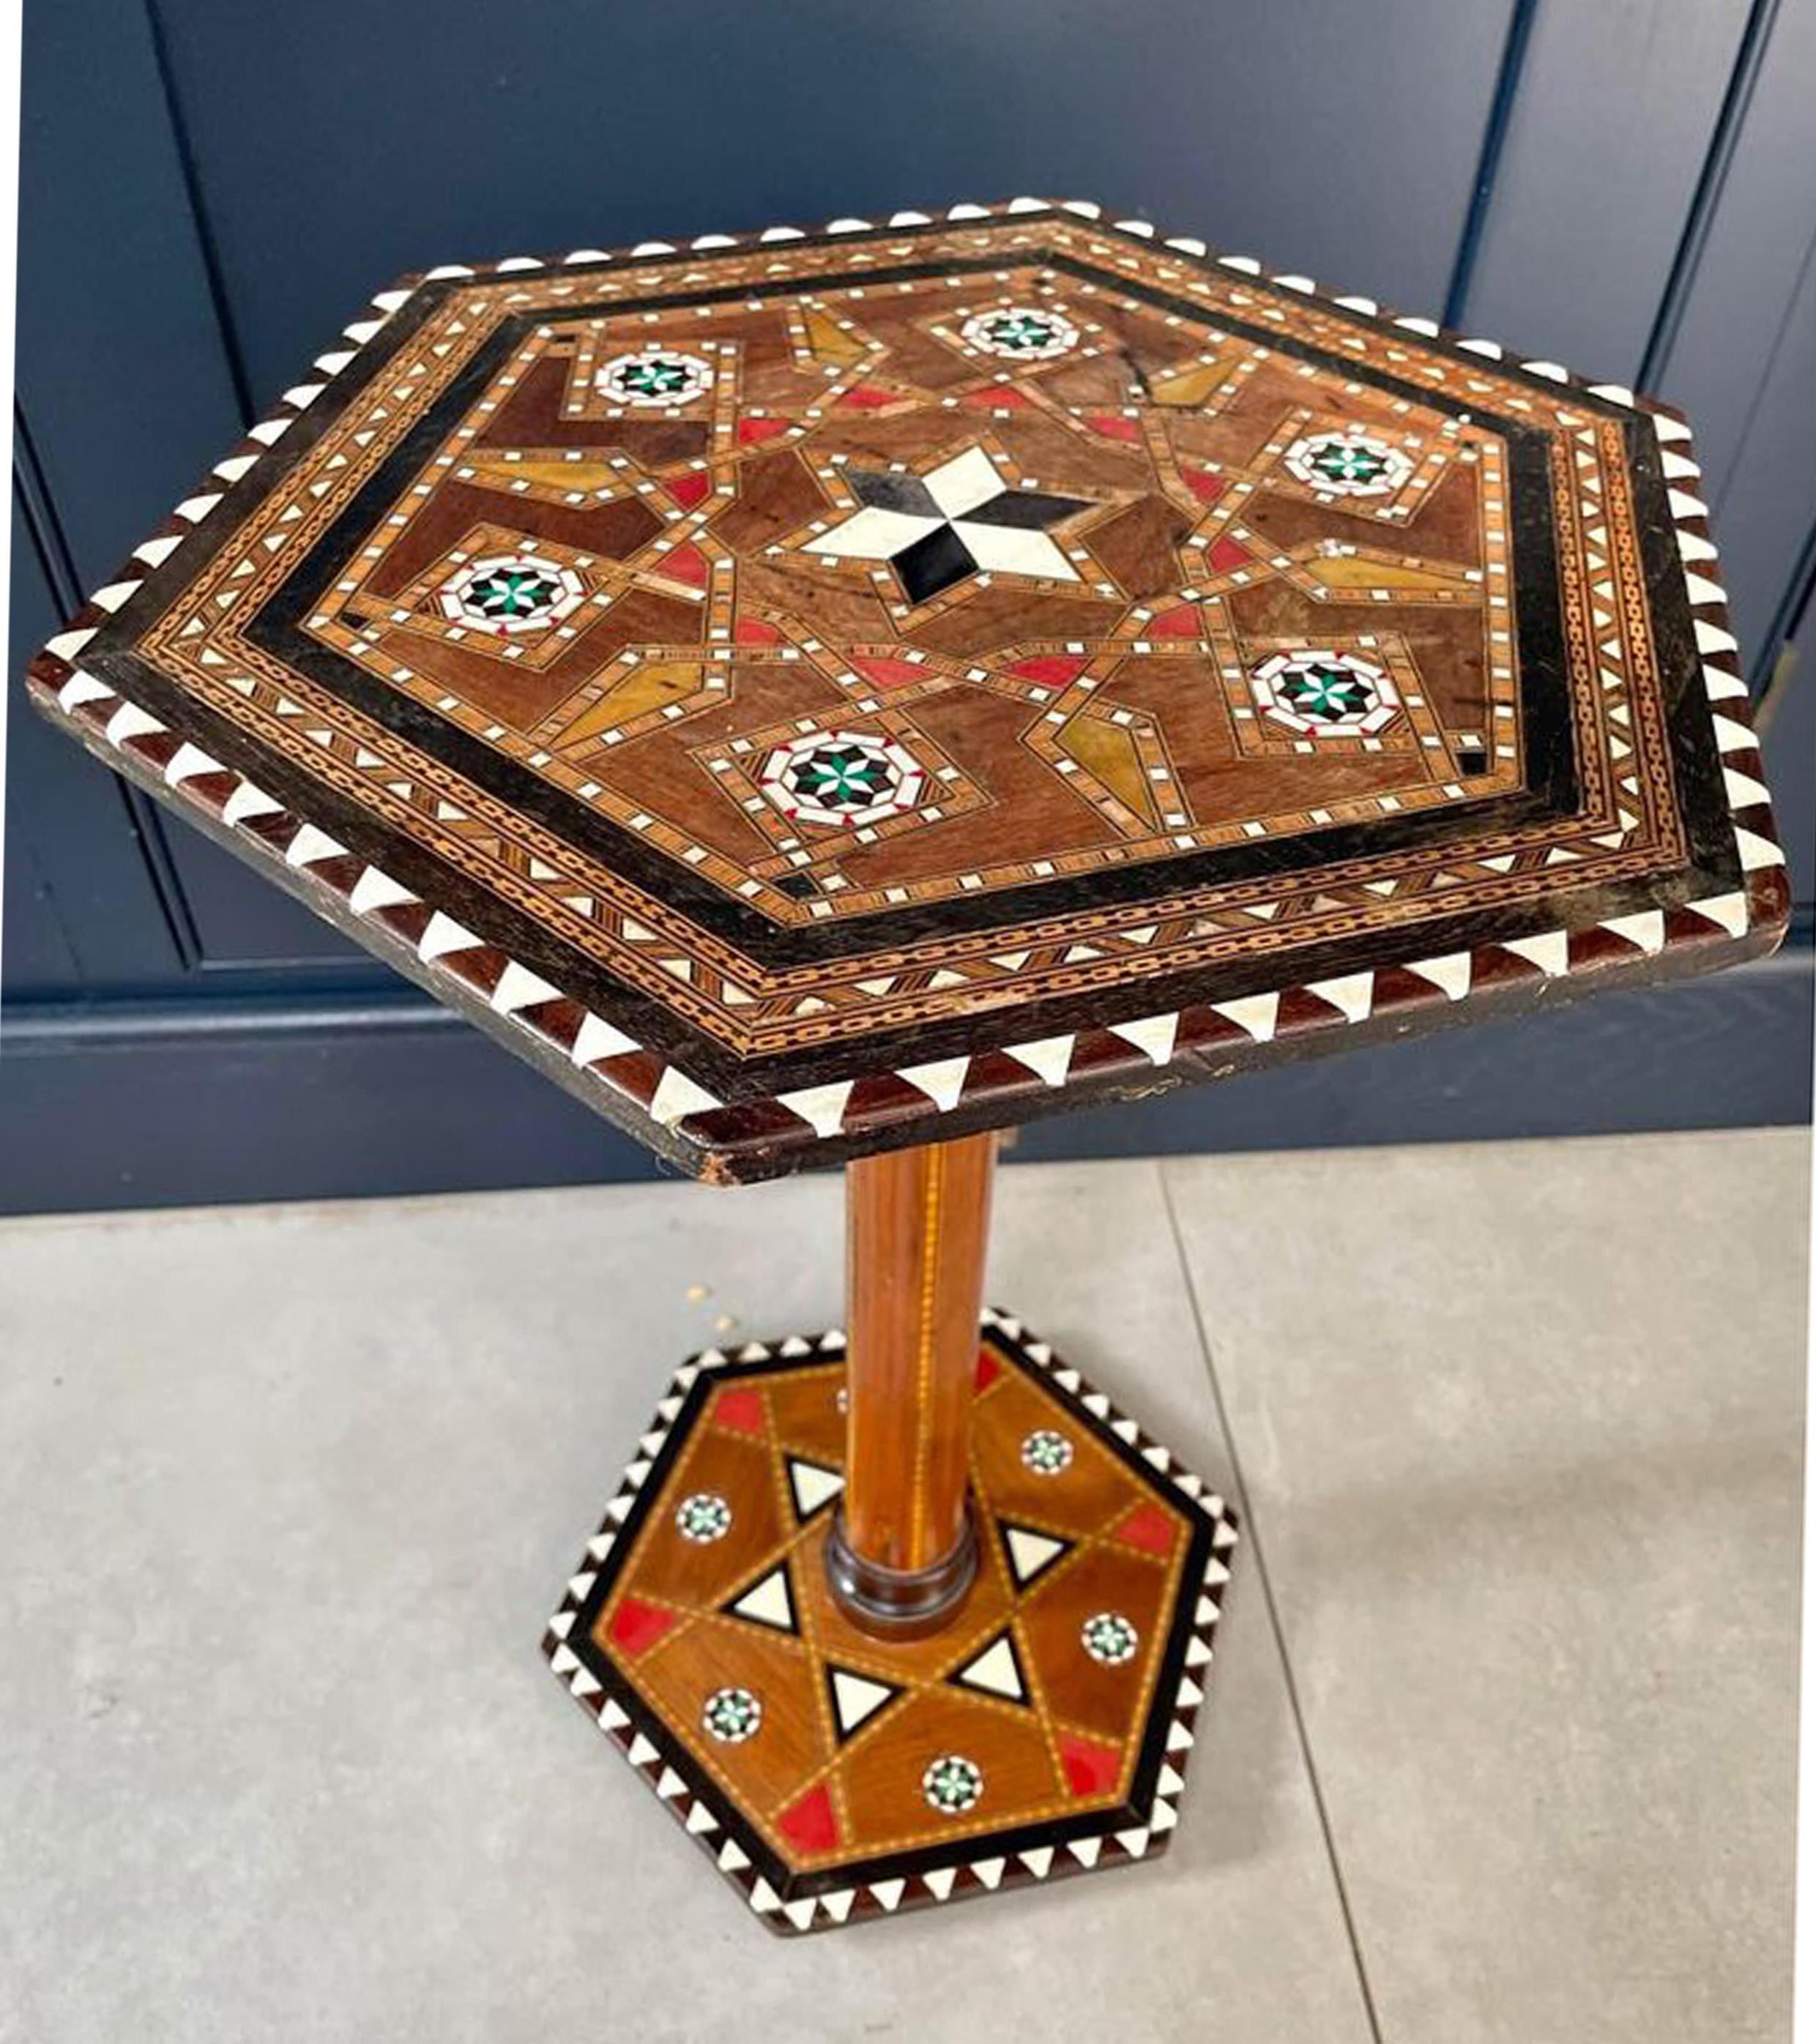 Beautiful 19th Century Damascene Design Hexagonal Moorish Fruitwood Tea Table With Parquetry Detailing 

Decorative Throughout With Beautiful Geometric Repeating Parquetry Patterns.

Finished With Ebonised Accents On A Decorative Hexagonal Platform